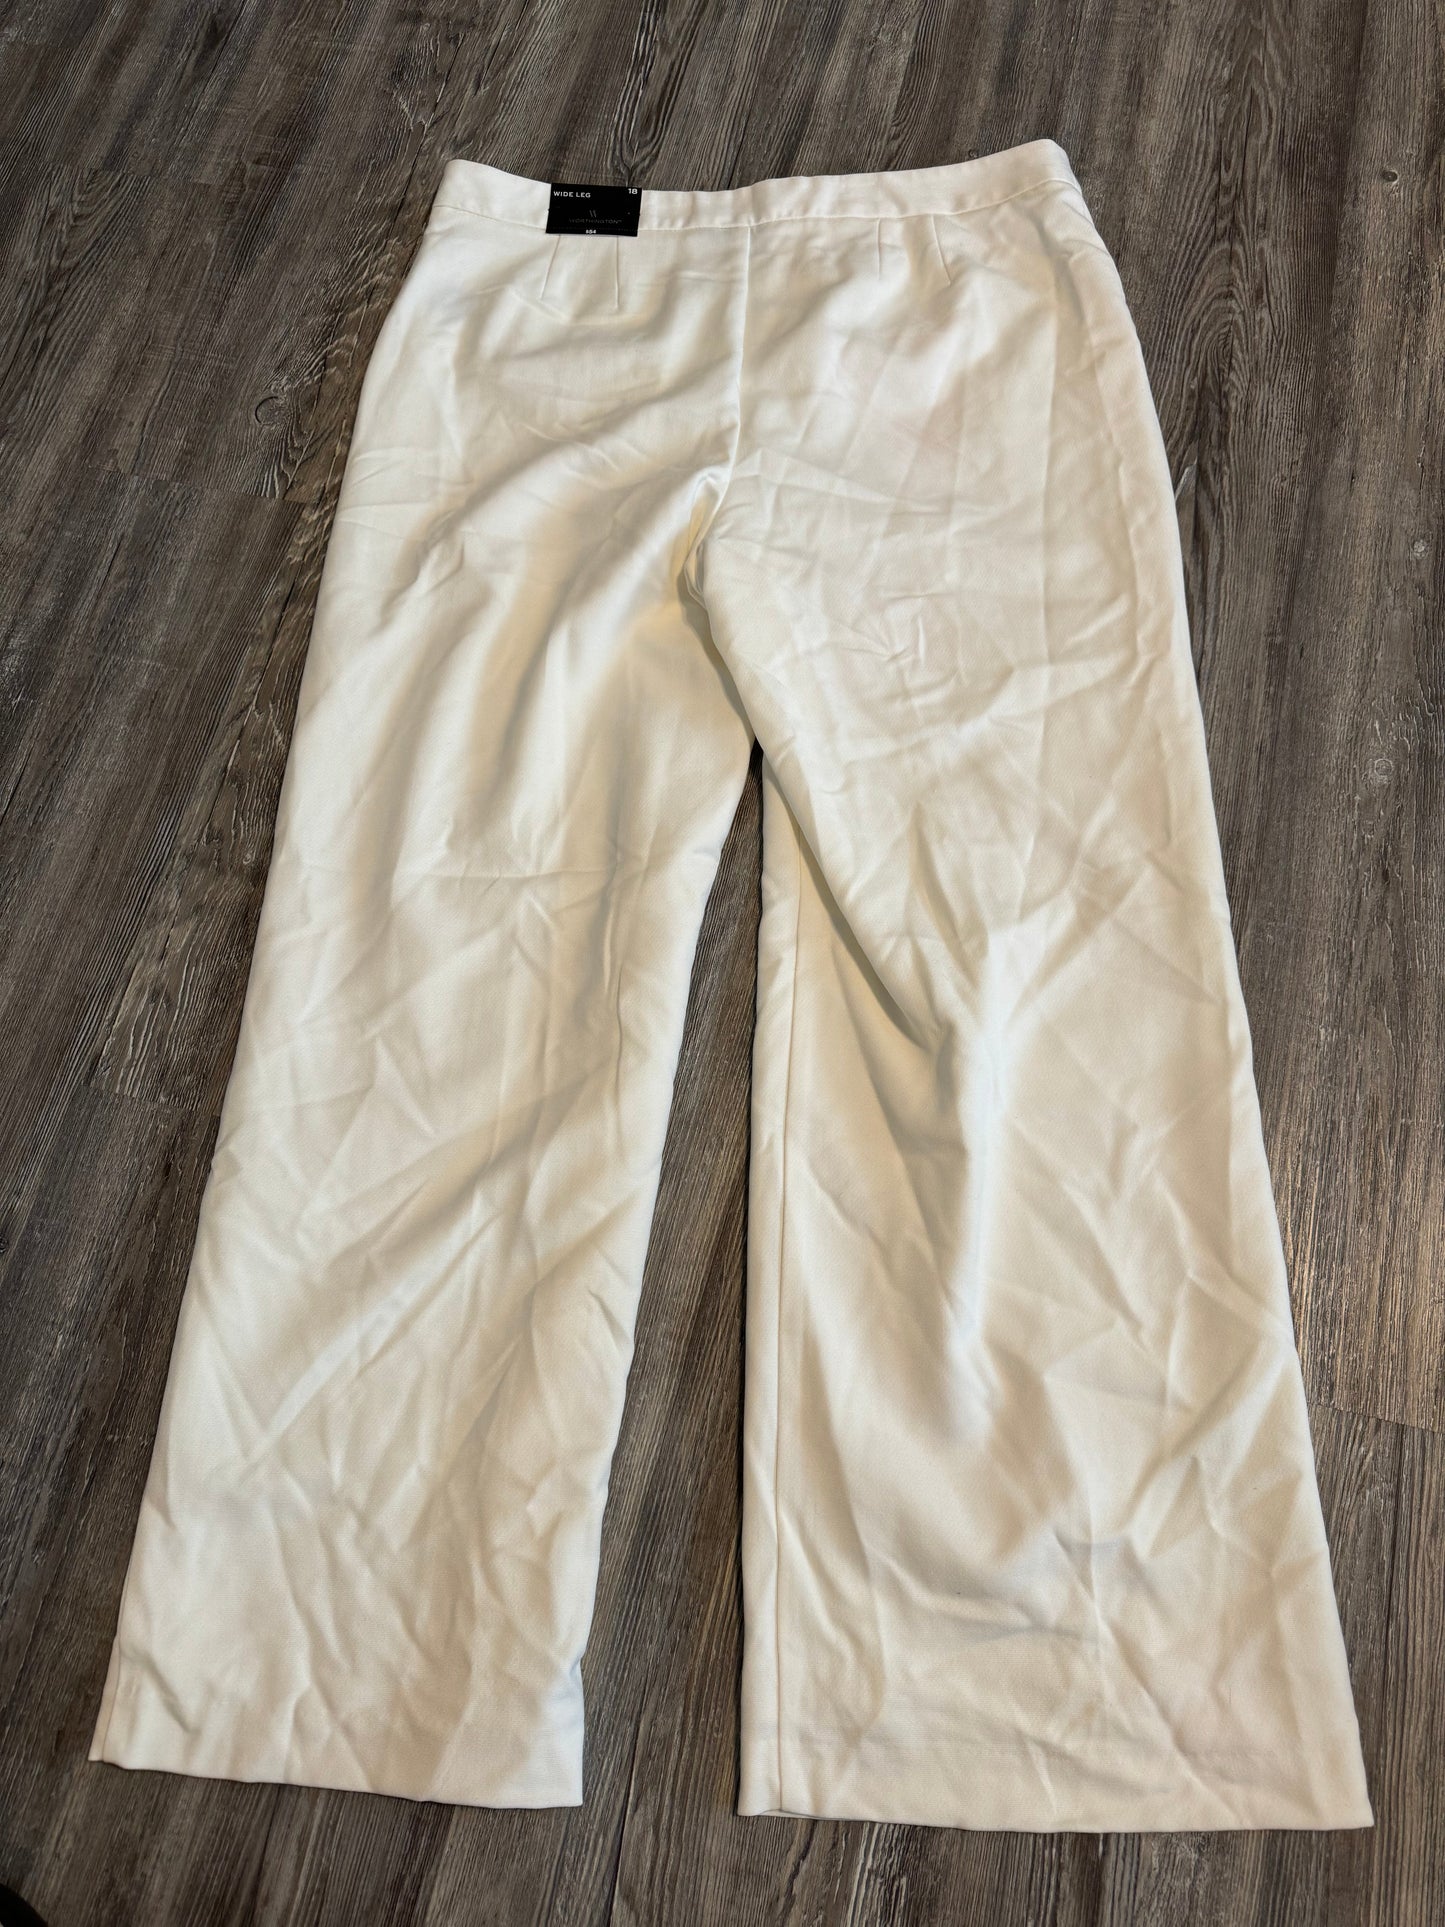 Pants Ankle By Worthington  Size: 18